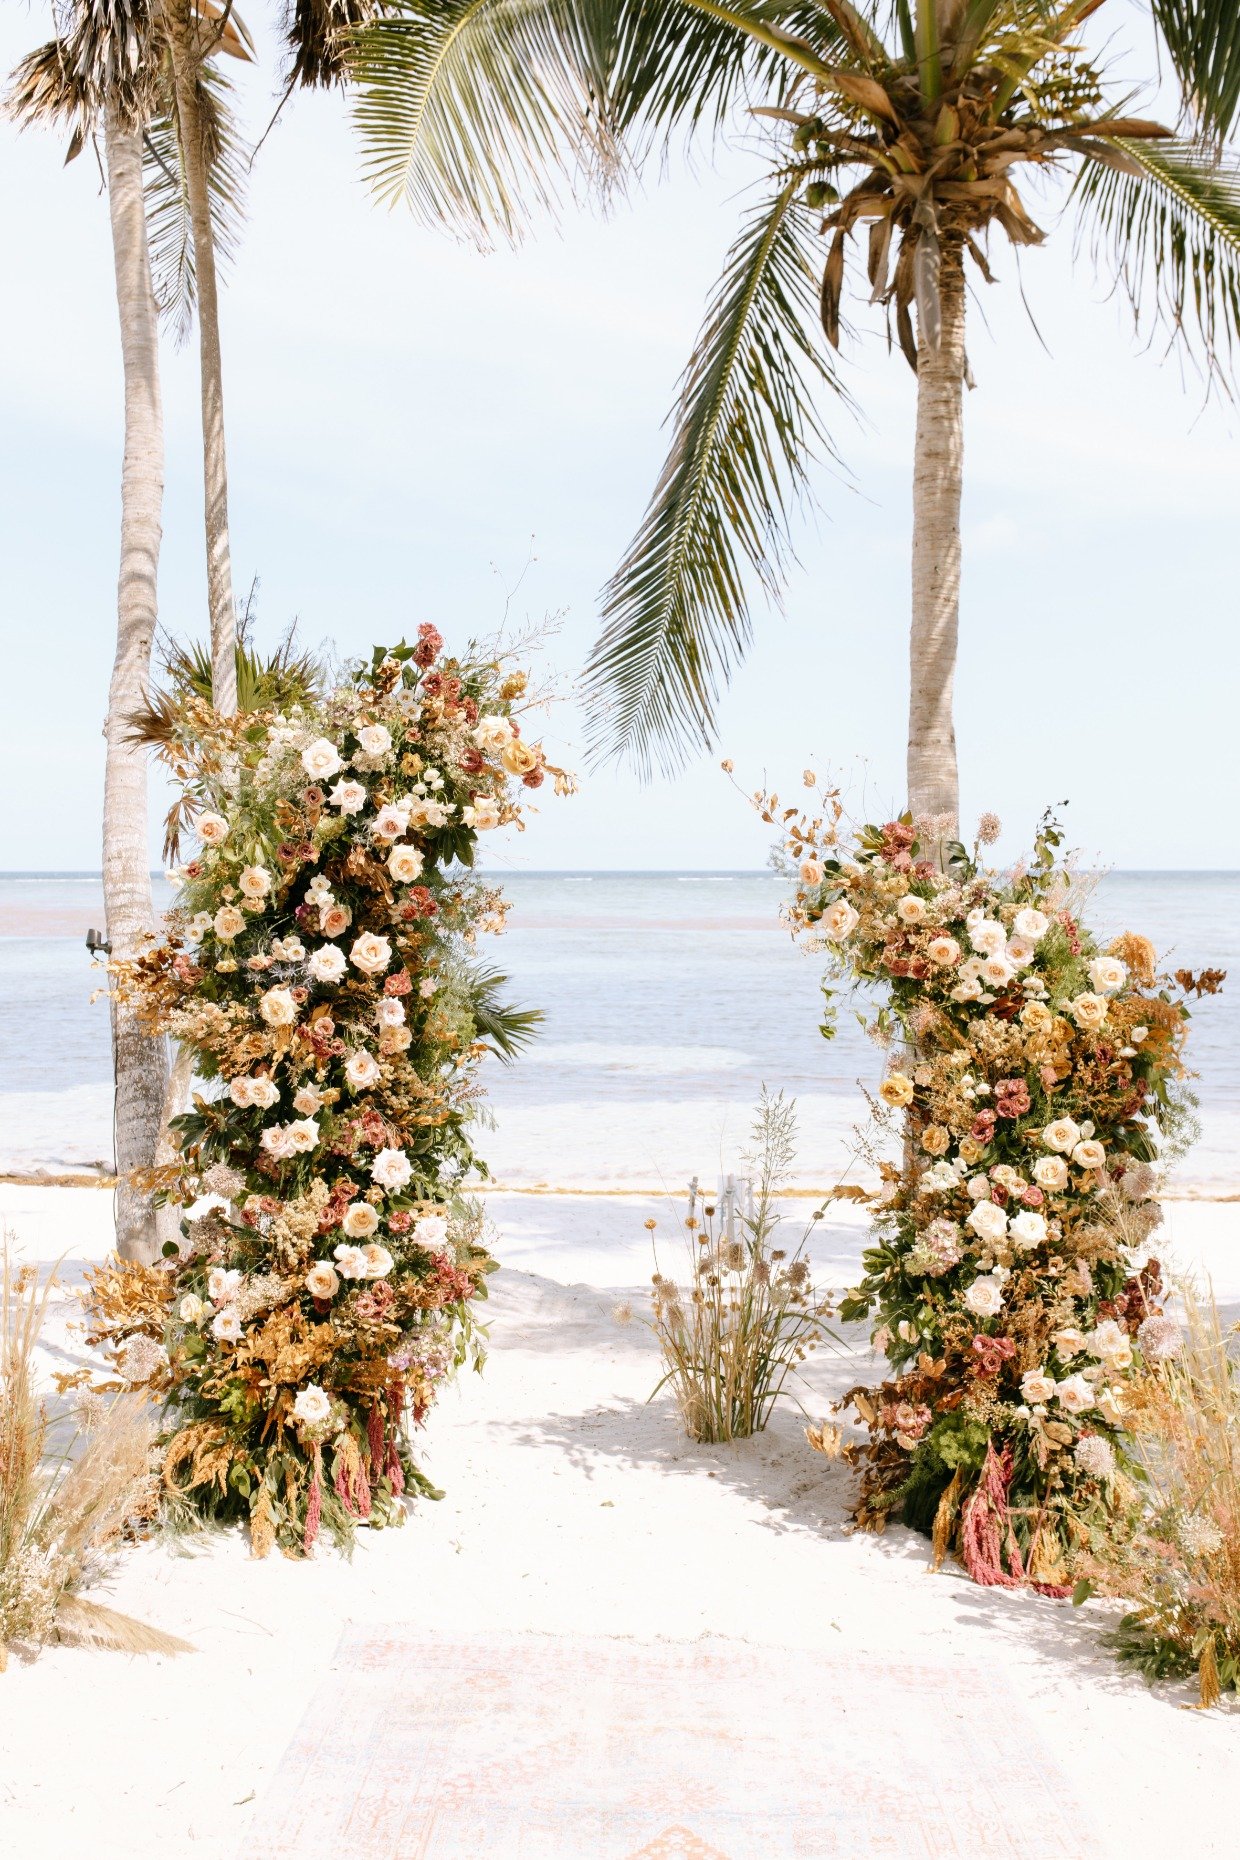 S.O.S. Planners beach wedding in Mexico floral arch